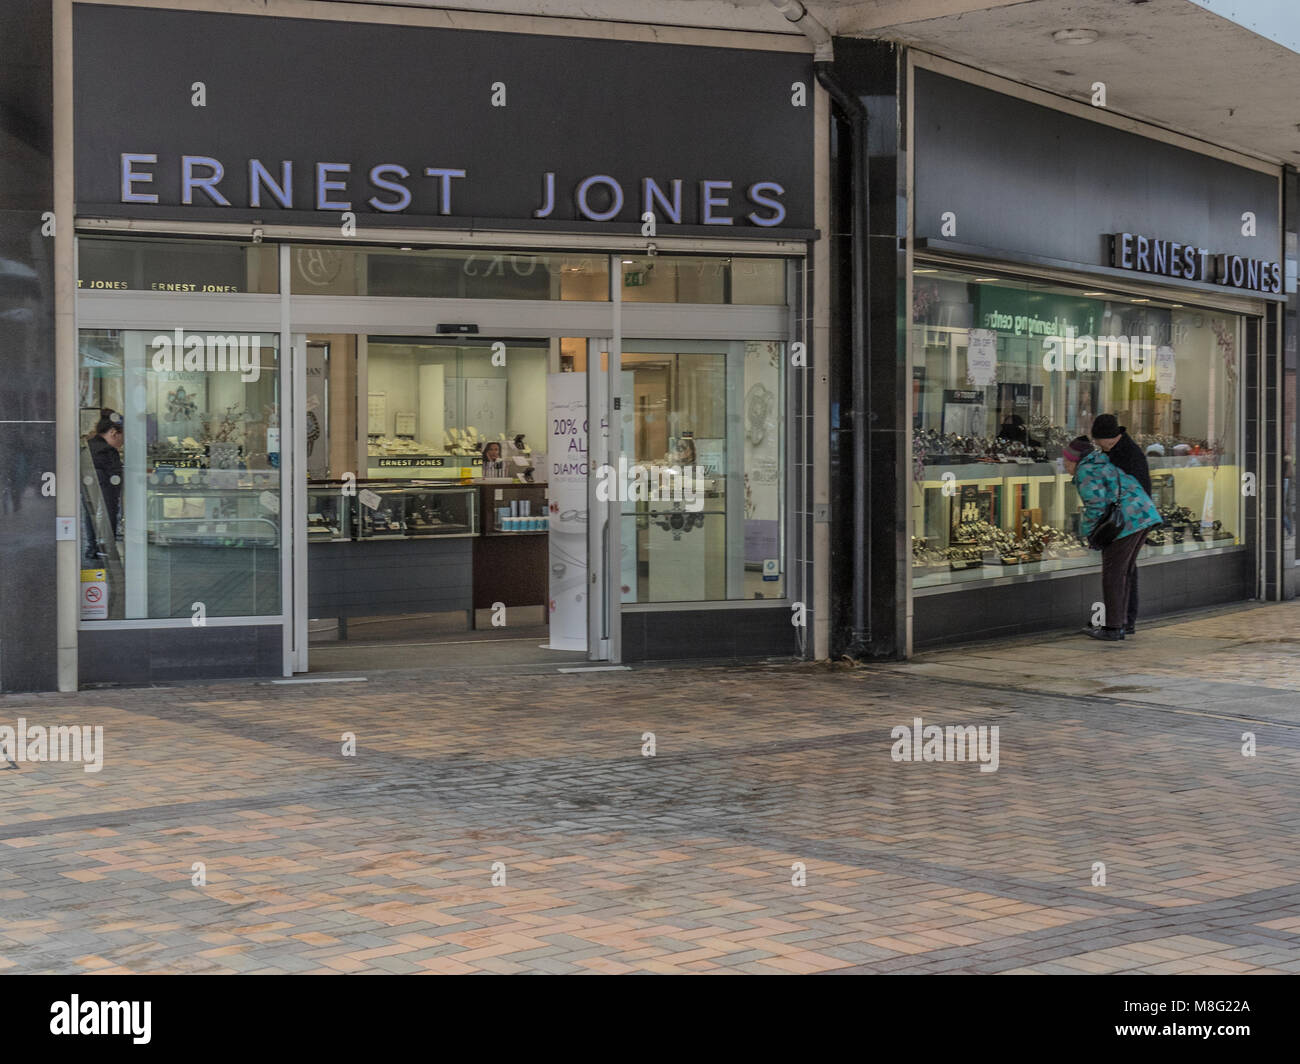 Ernest Jones, Stockport Town Centre Shopping area, Merseyway Stock Photo